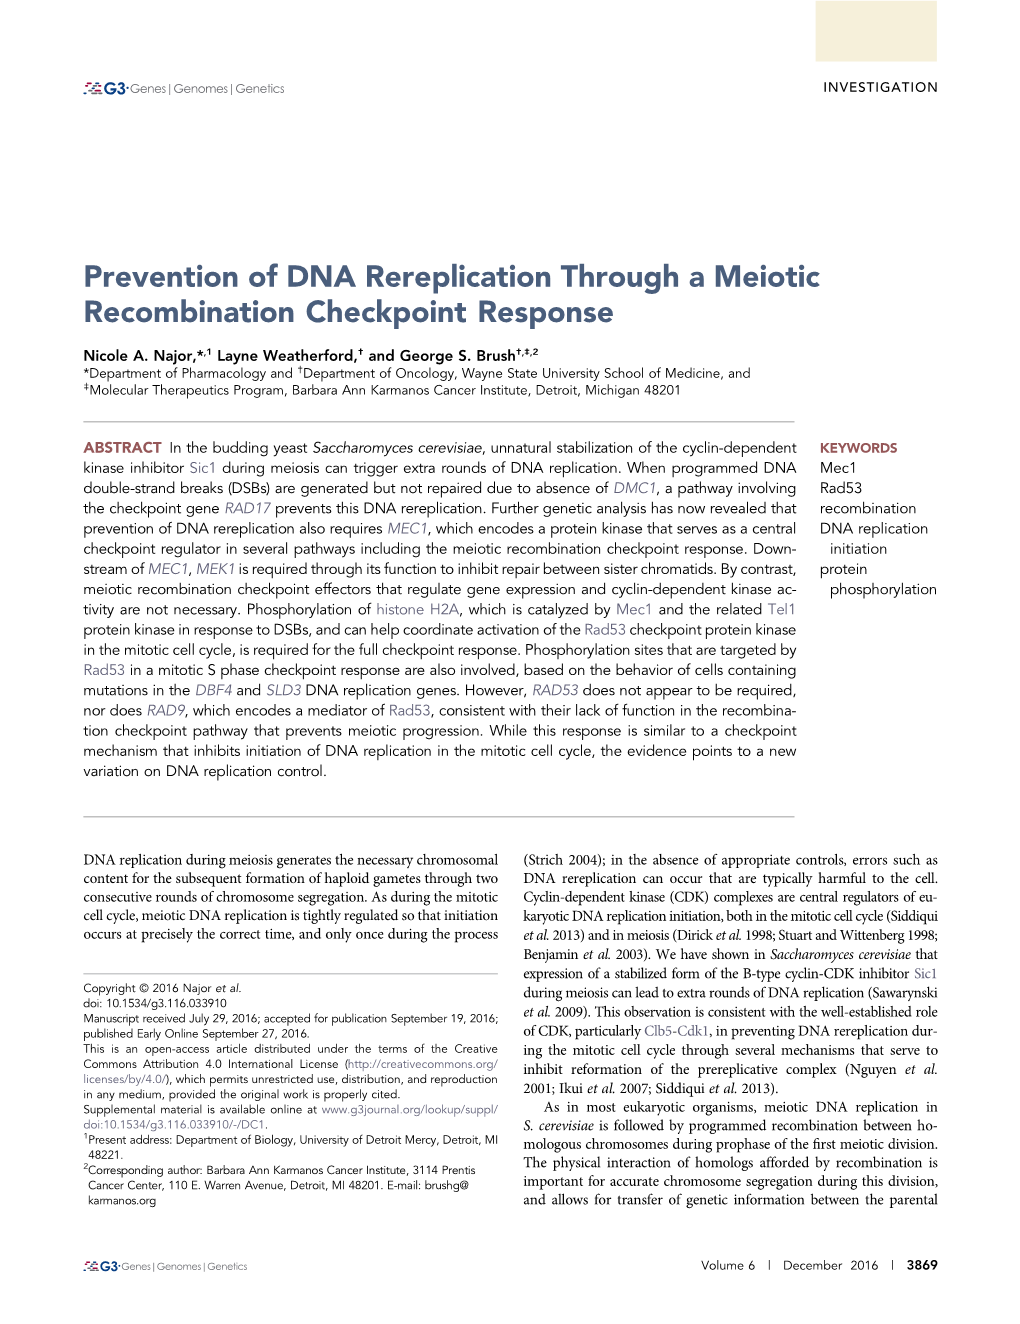 Prevention of DNA Rereplication Through a Meiotic Recombination Checkpoint Response